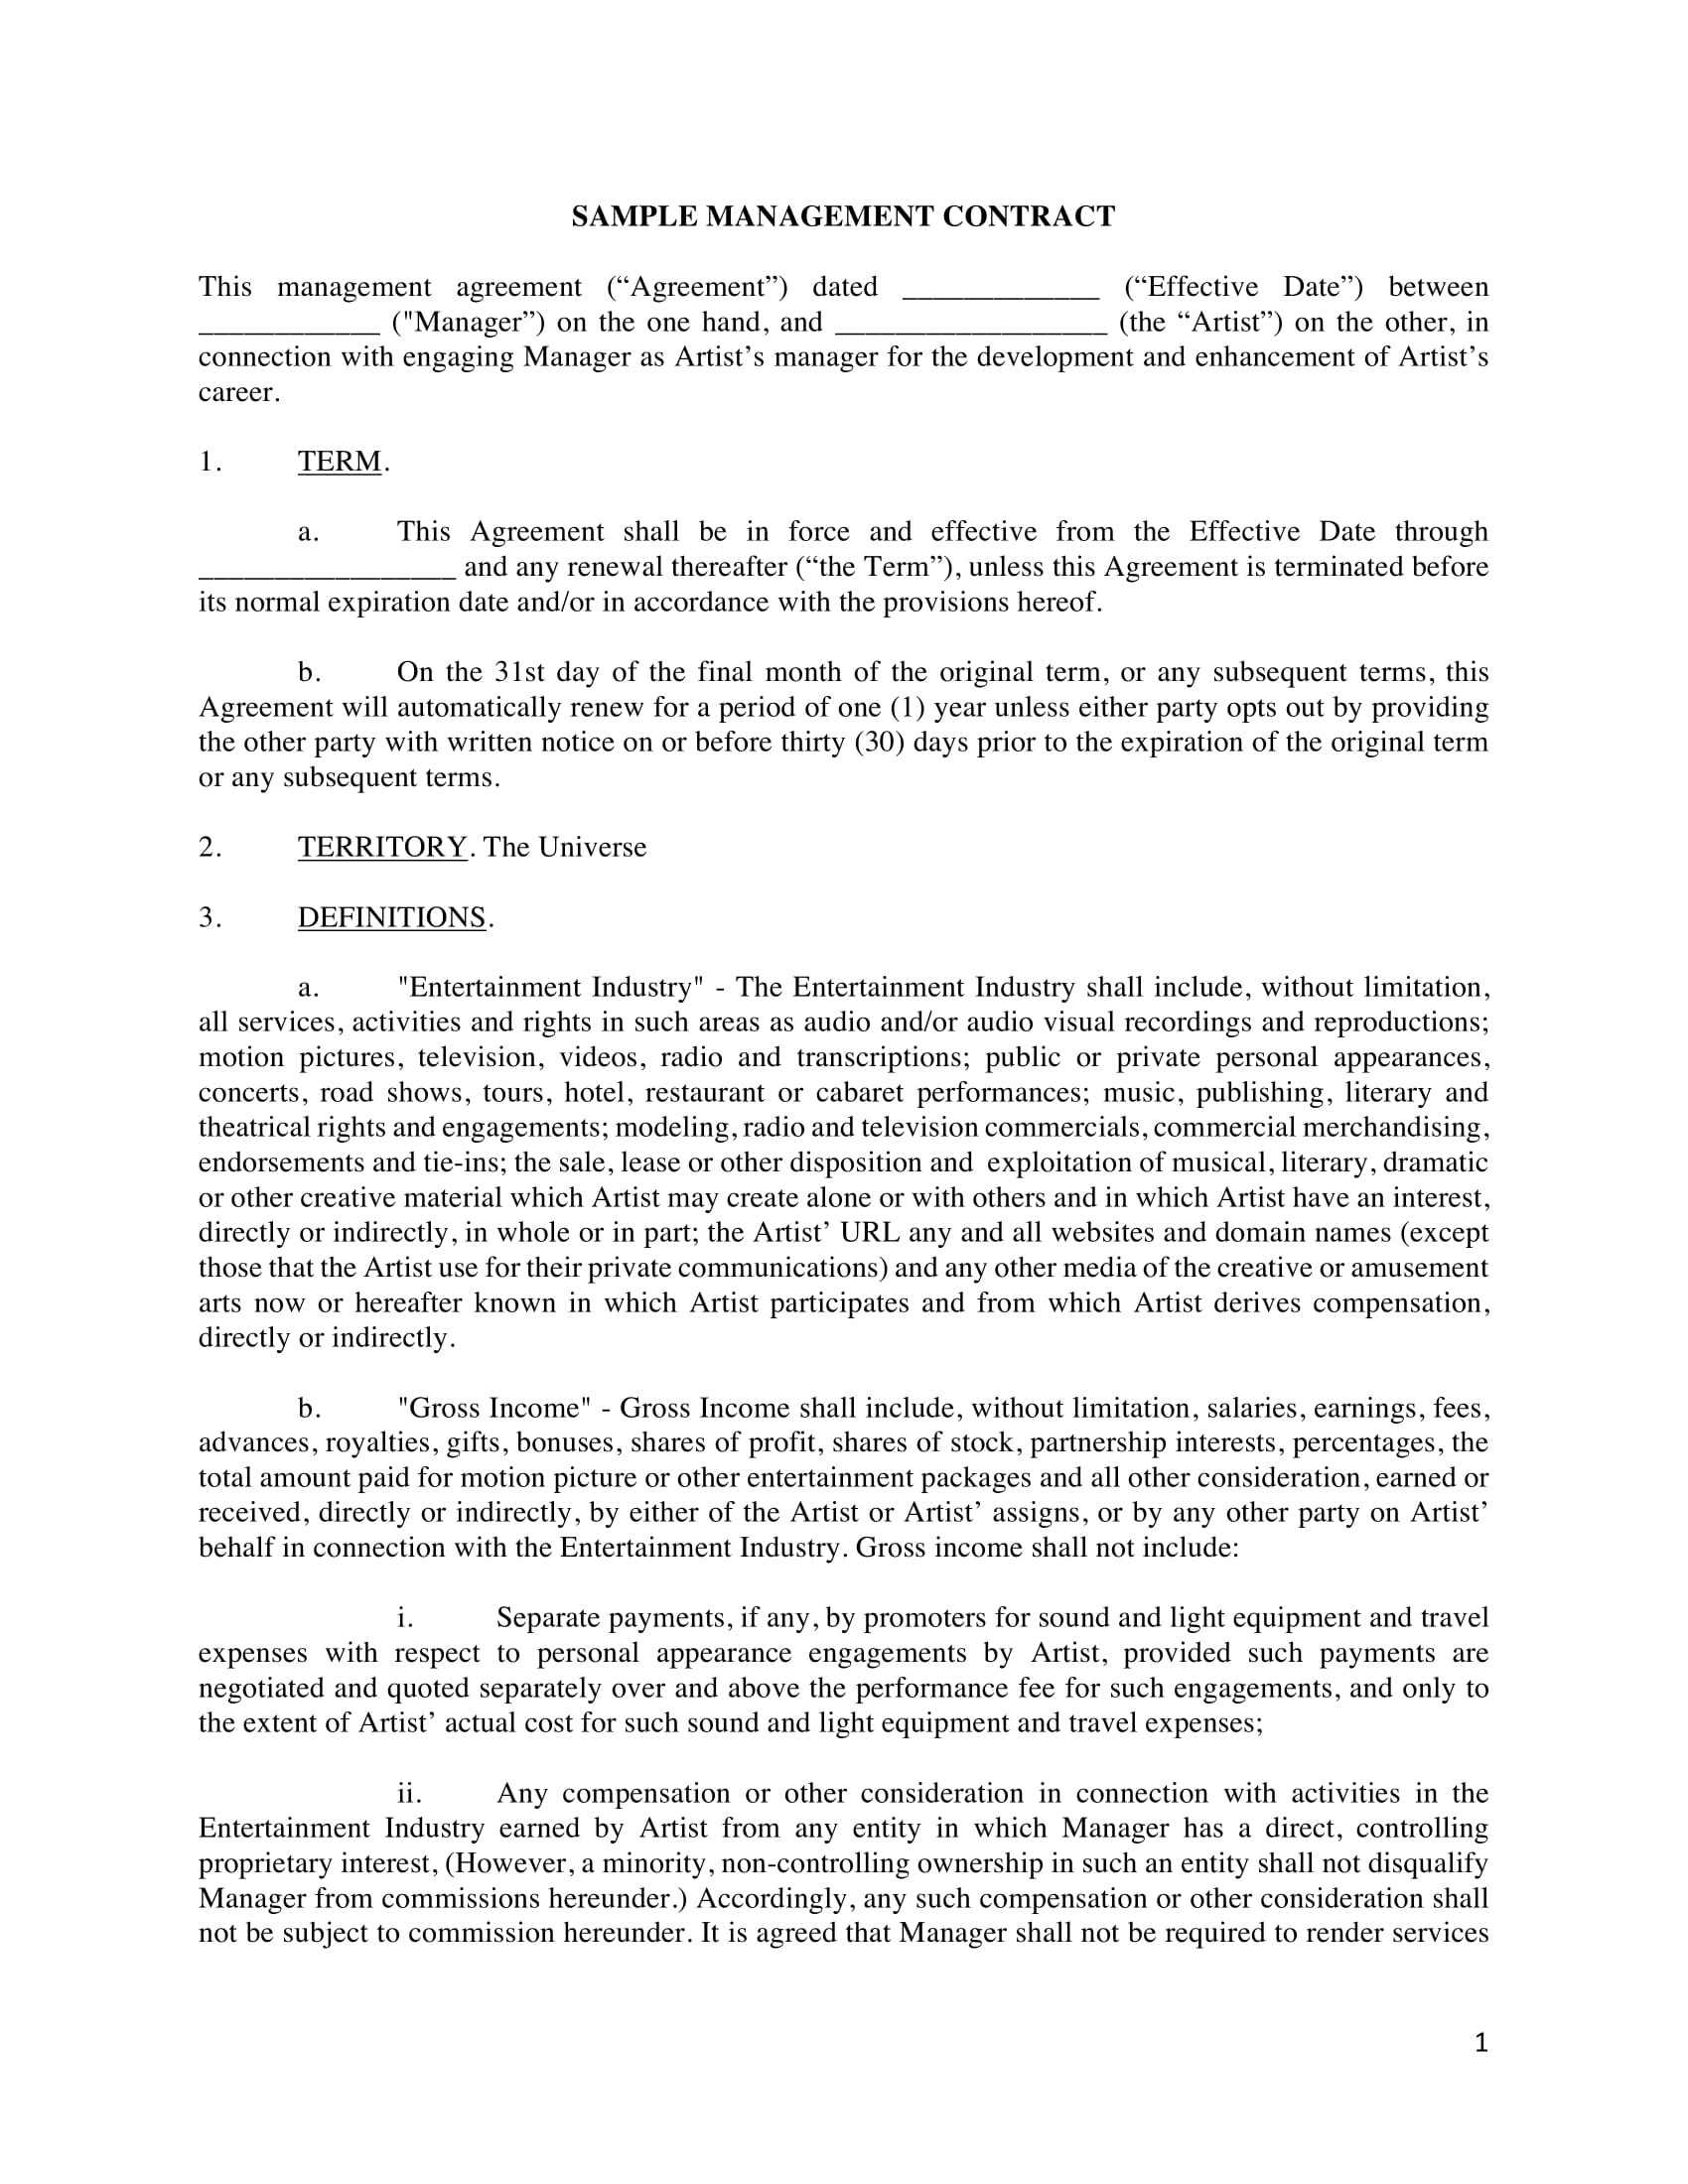 20+ Business Manager Contract Templates - PDF, Docs  Examples With Regard To talent management agreement template